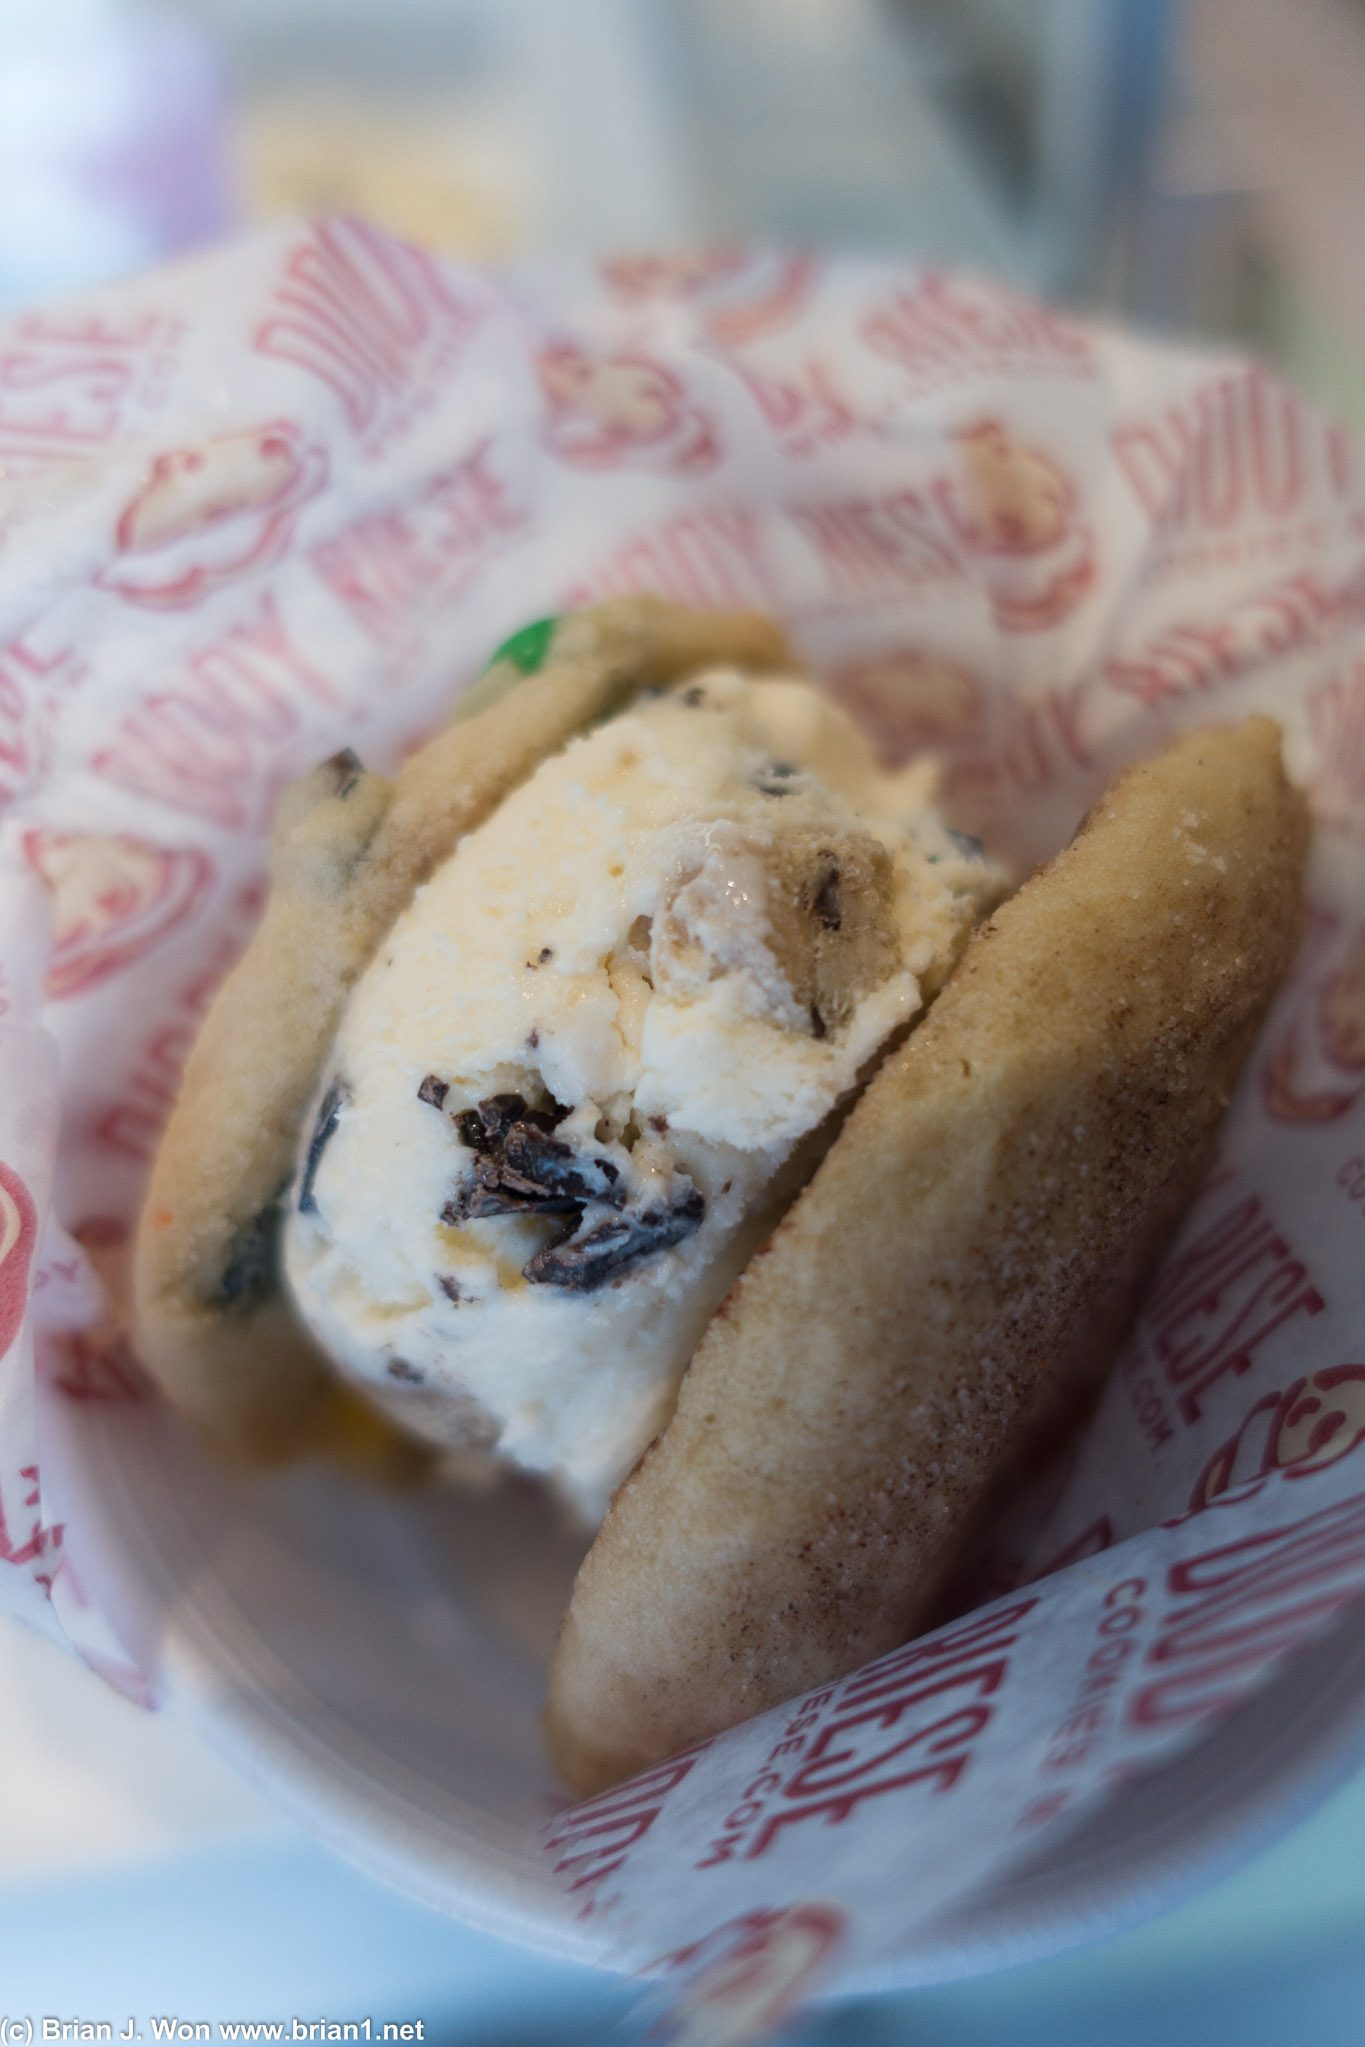 Can't forget Diddy Riese.